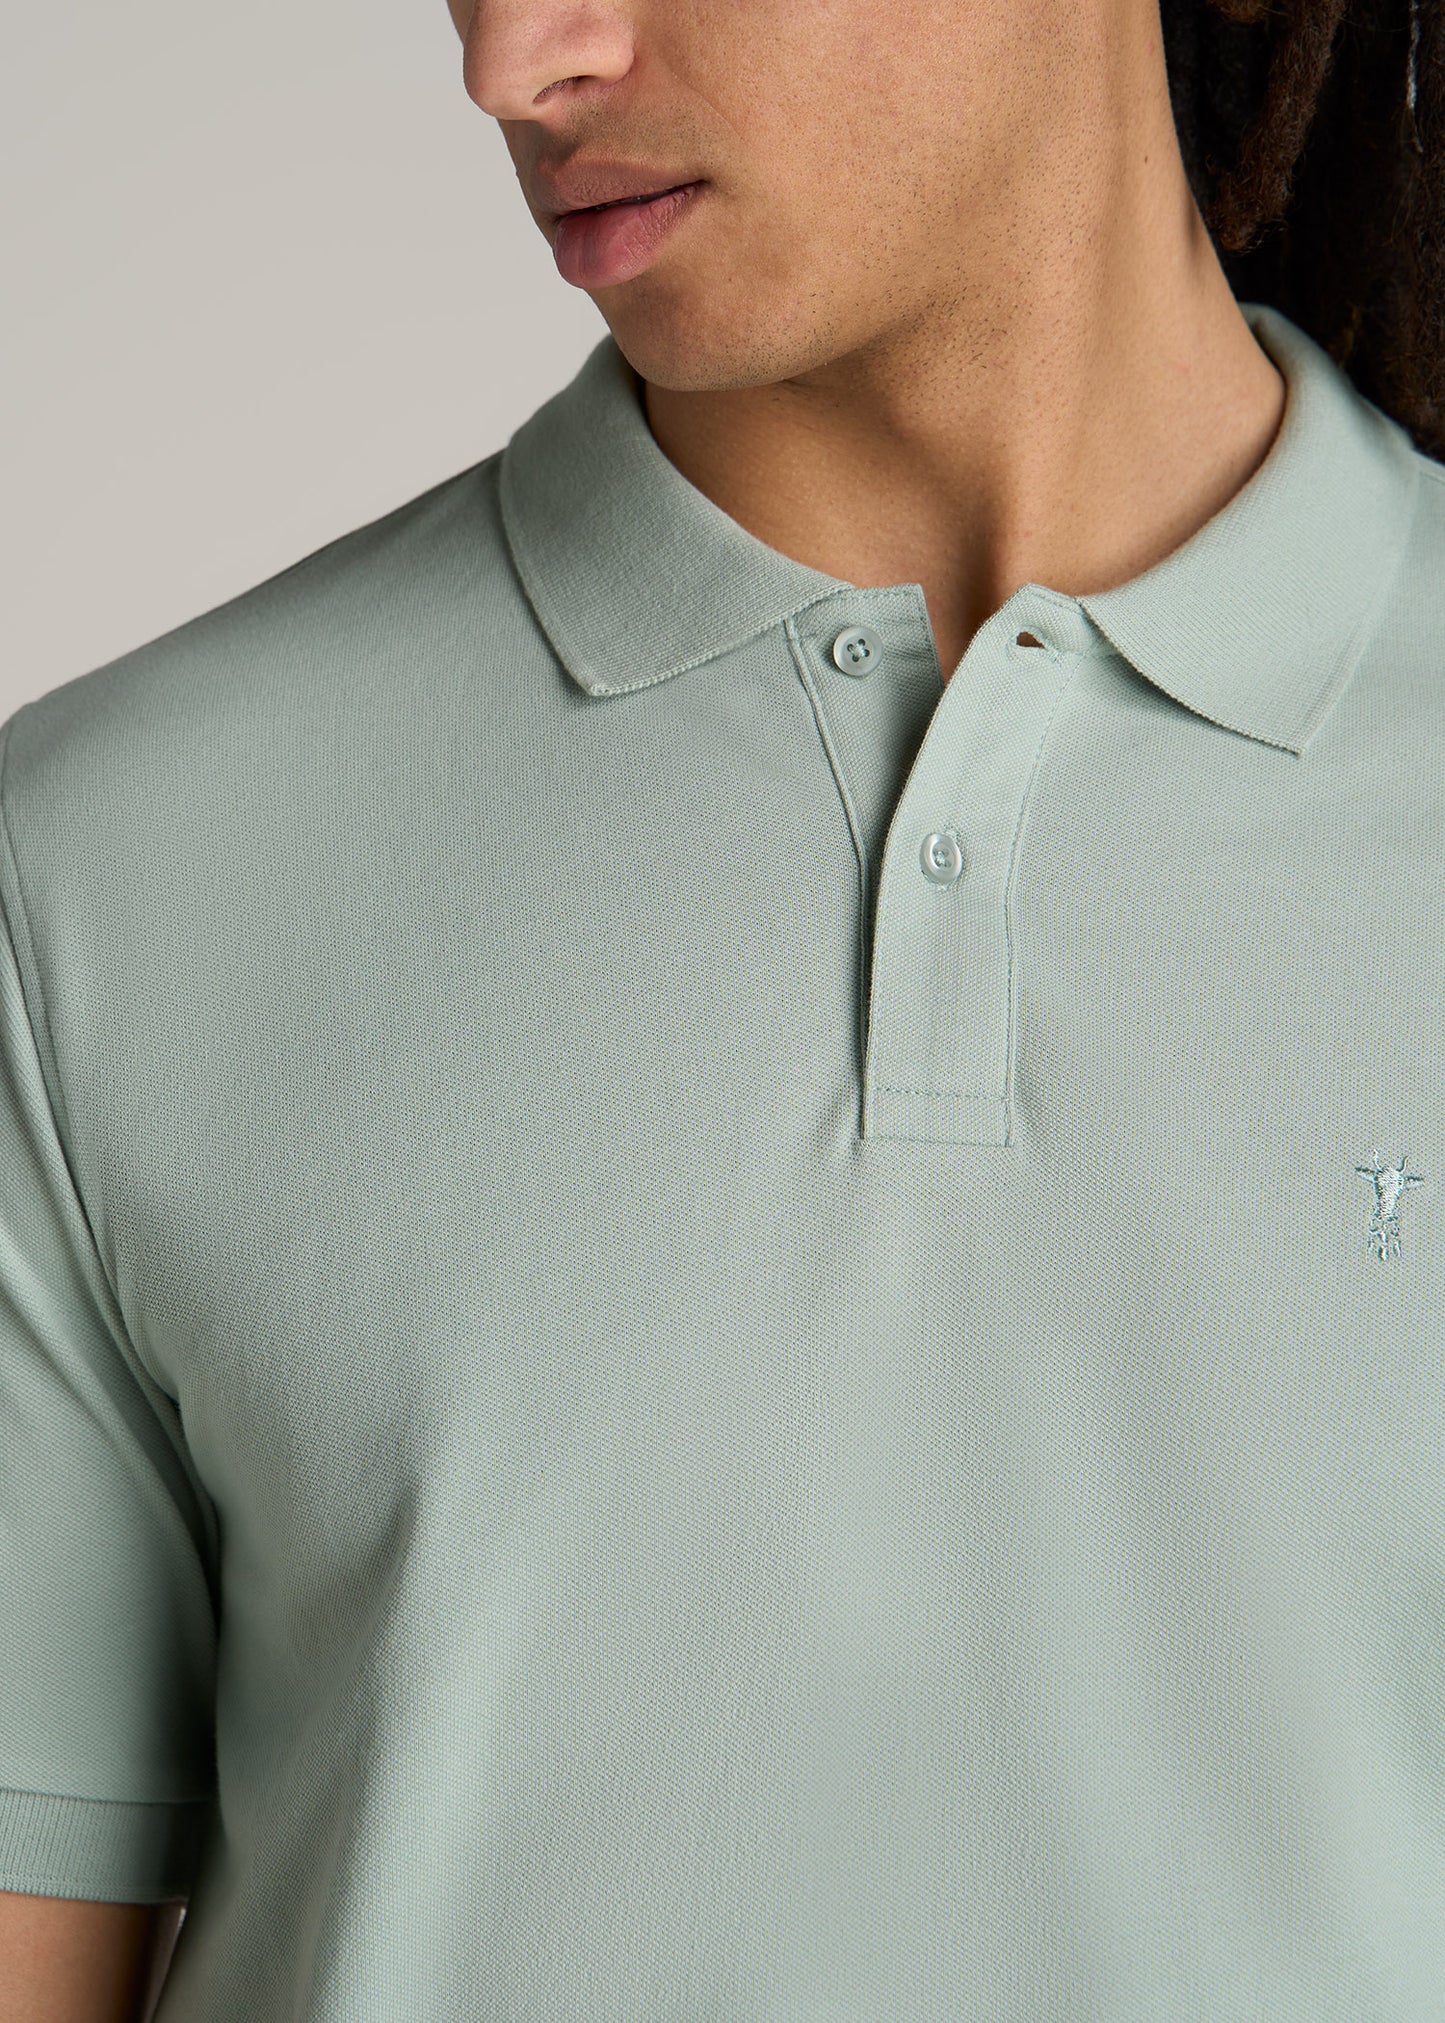 Men's Tall Classic Polo with Embroidered Logo in Sage Mist